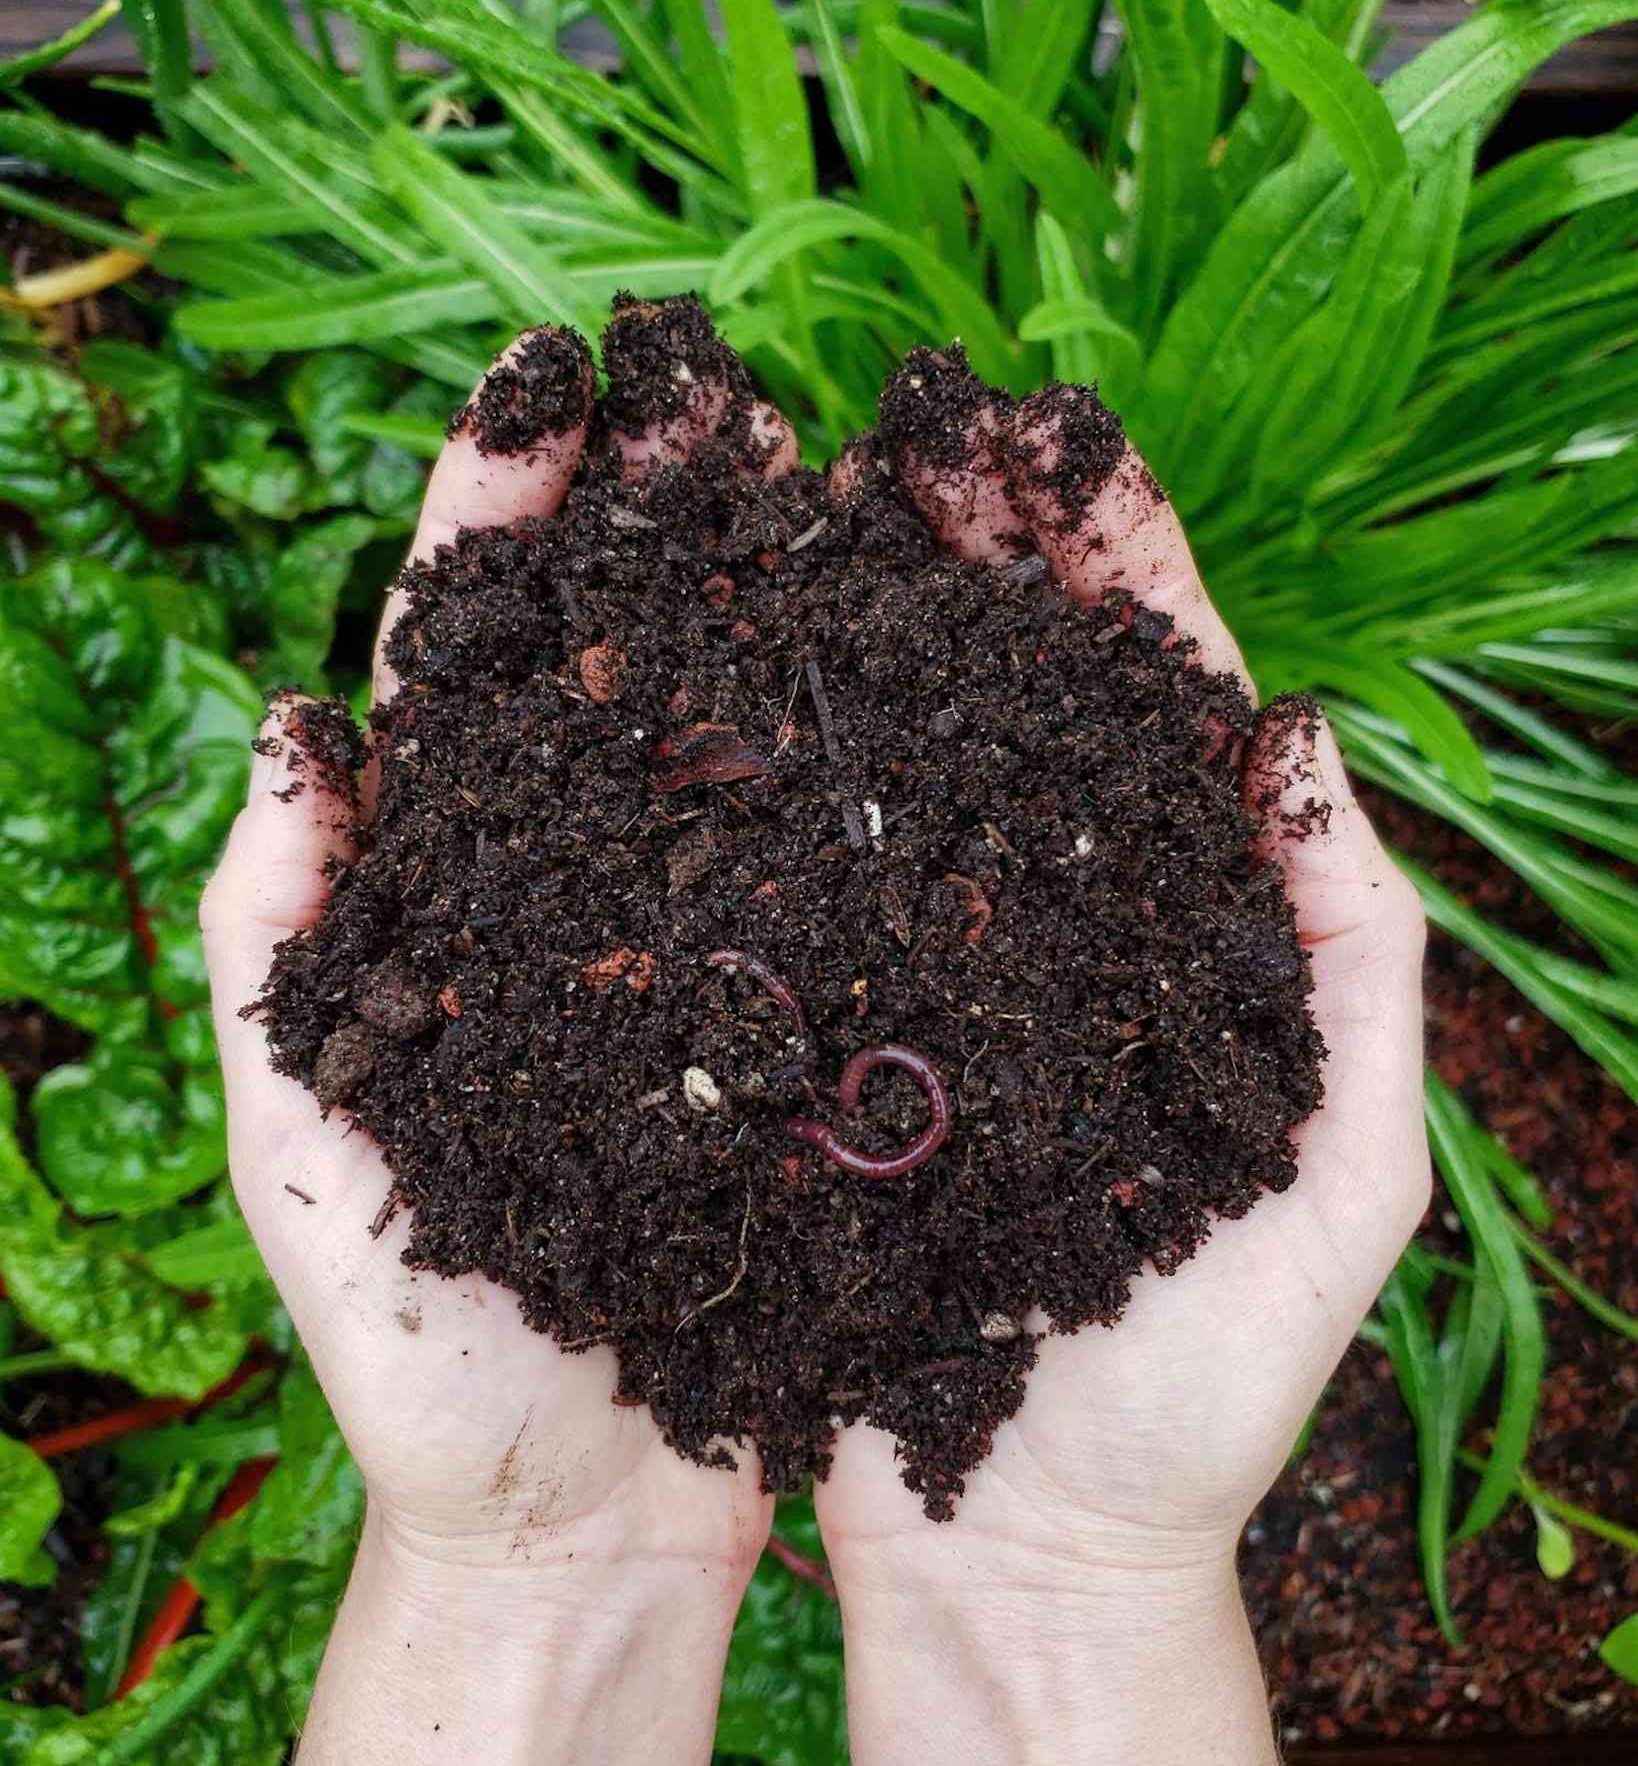 What Organic Matter Cannot Be Sent to Compost